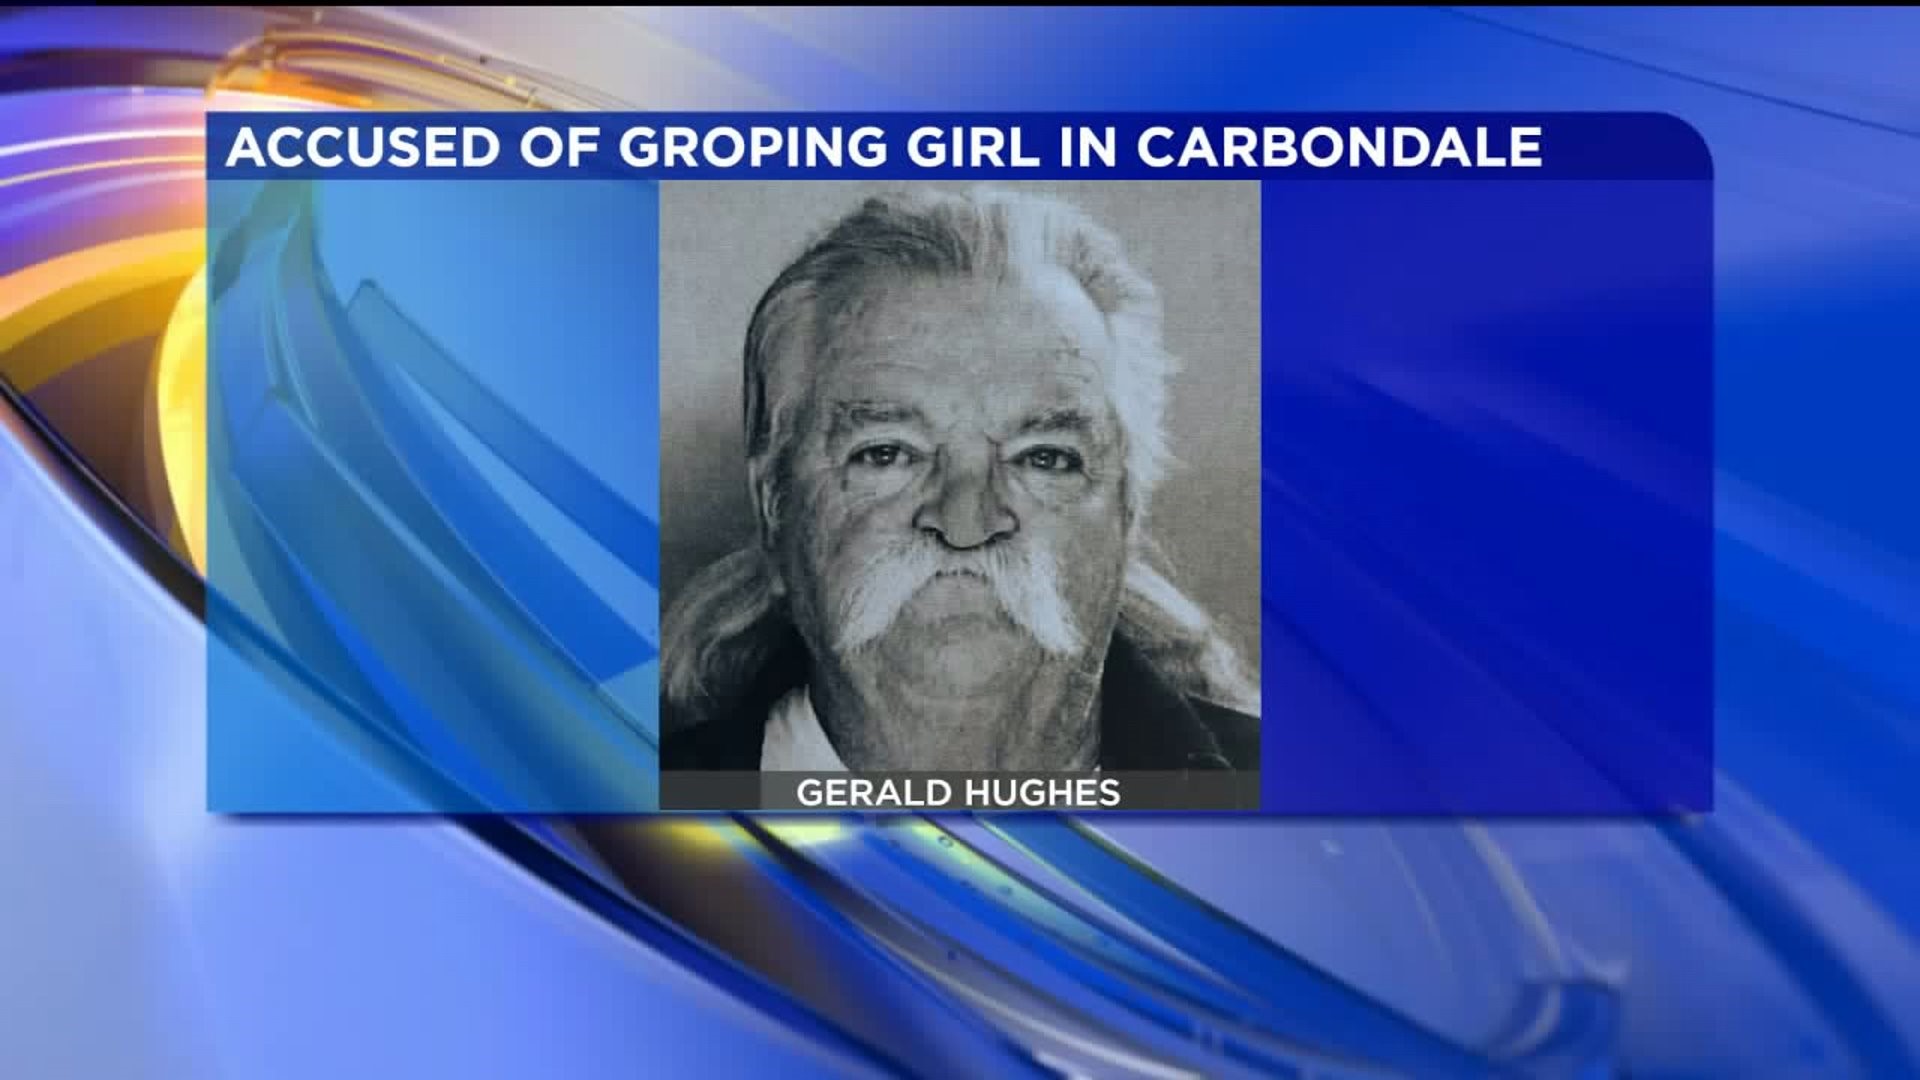 Registered Sex Offender Accused of Groping Girl in Carbondale